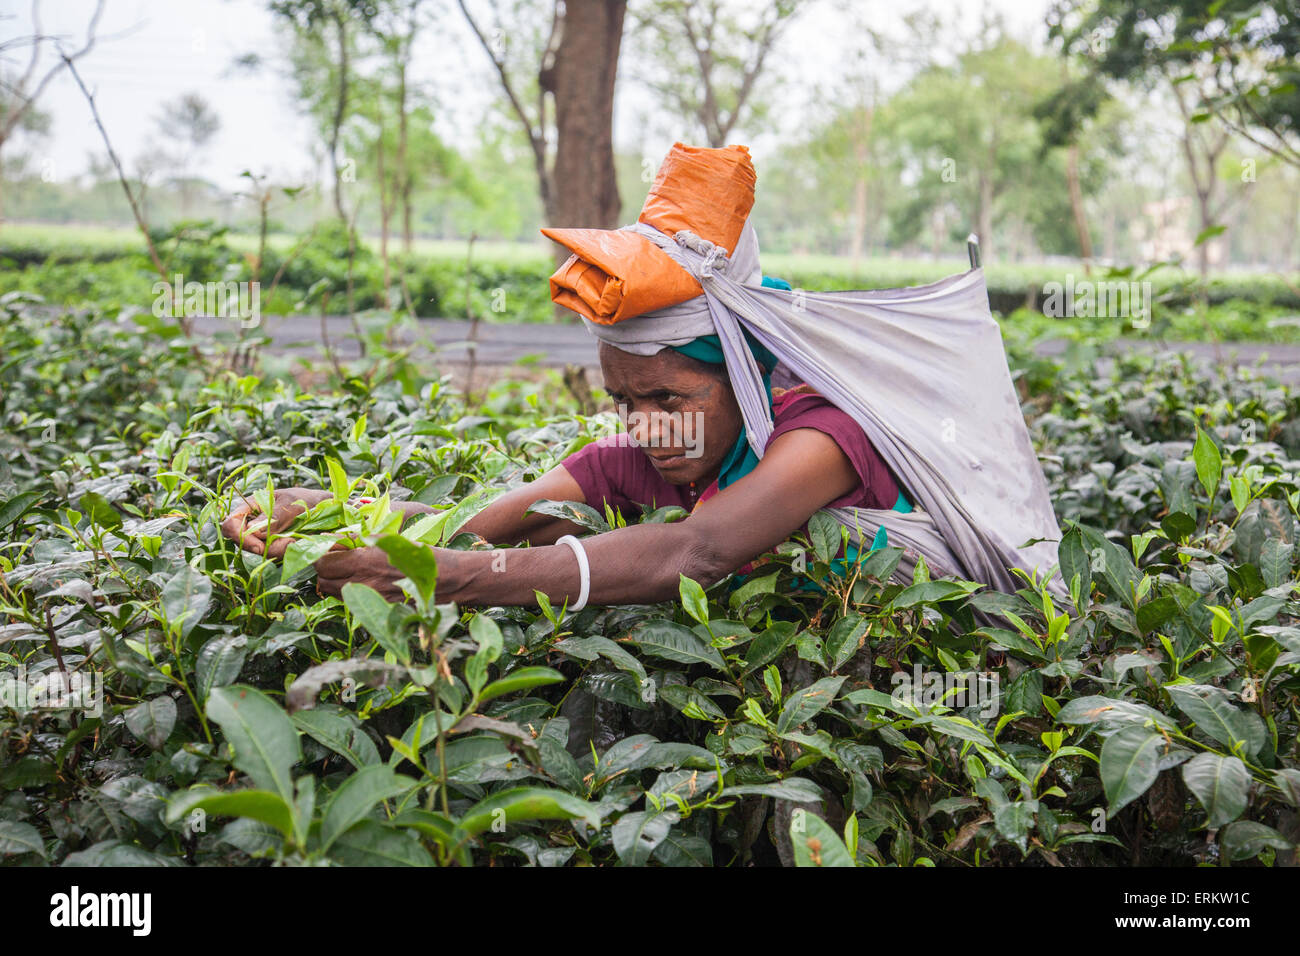 Woman collecting tea leaves, hard work as it is very difficult to disentangle the thick bushes, Bagdogra, Darjeeling, India Stock Photo